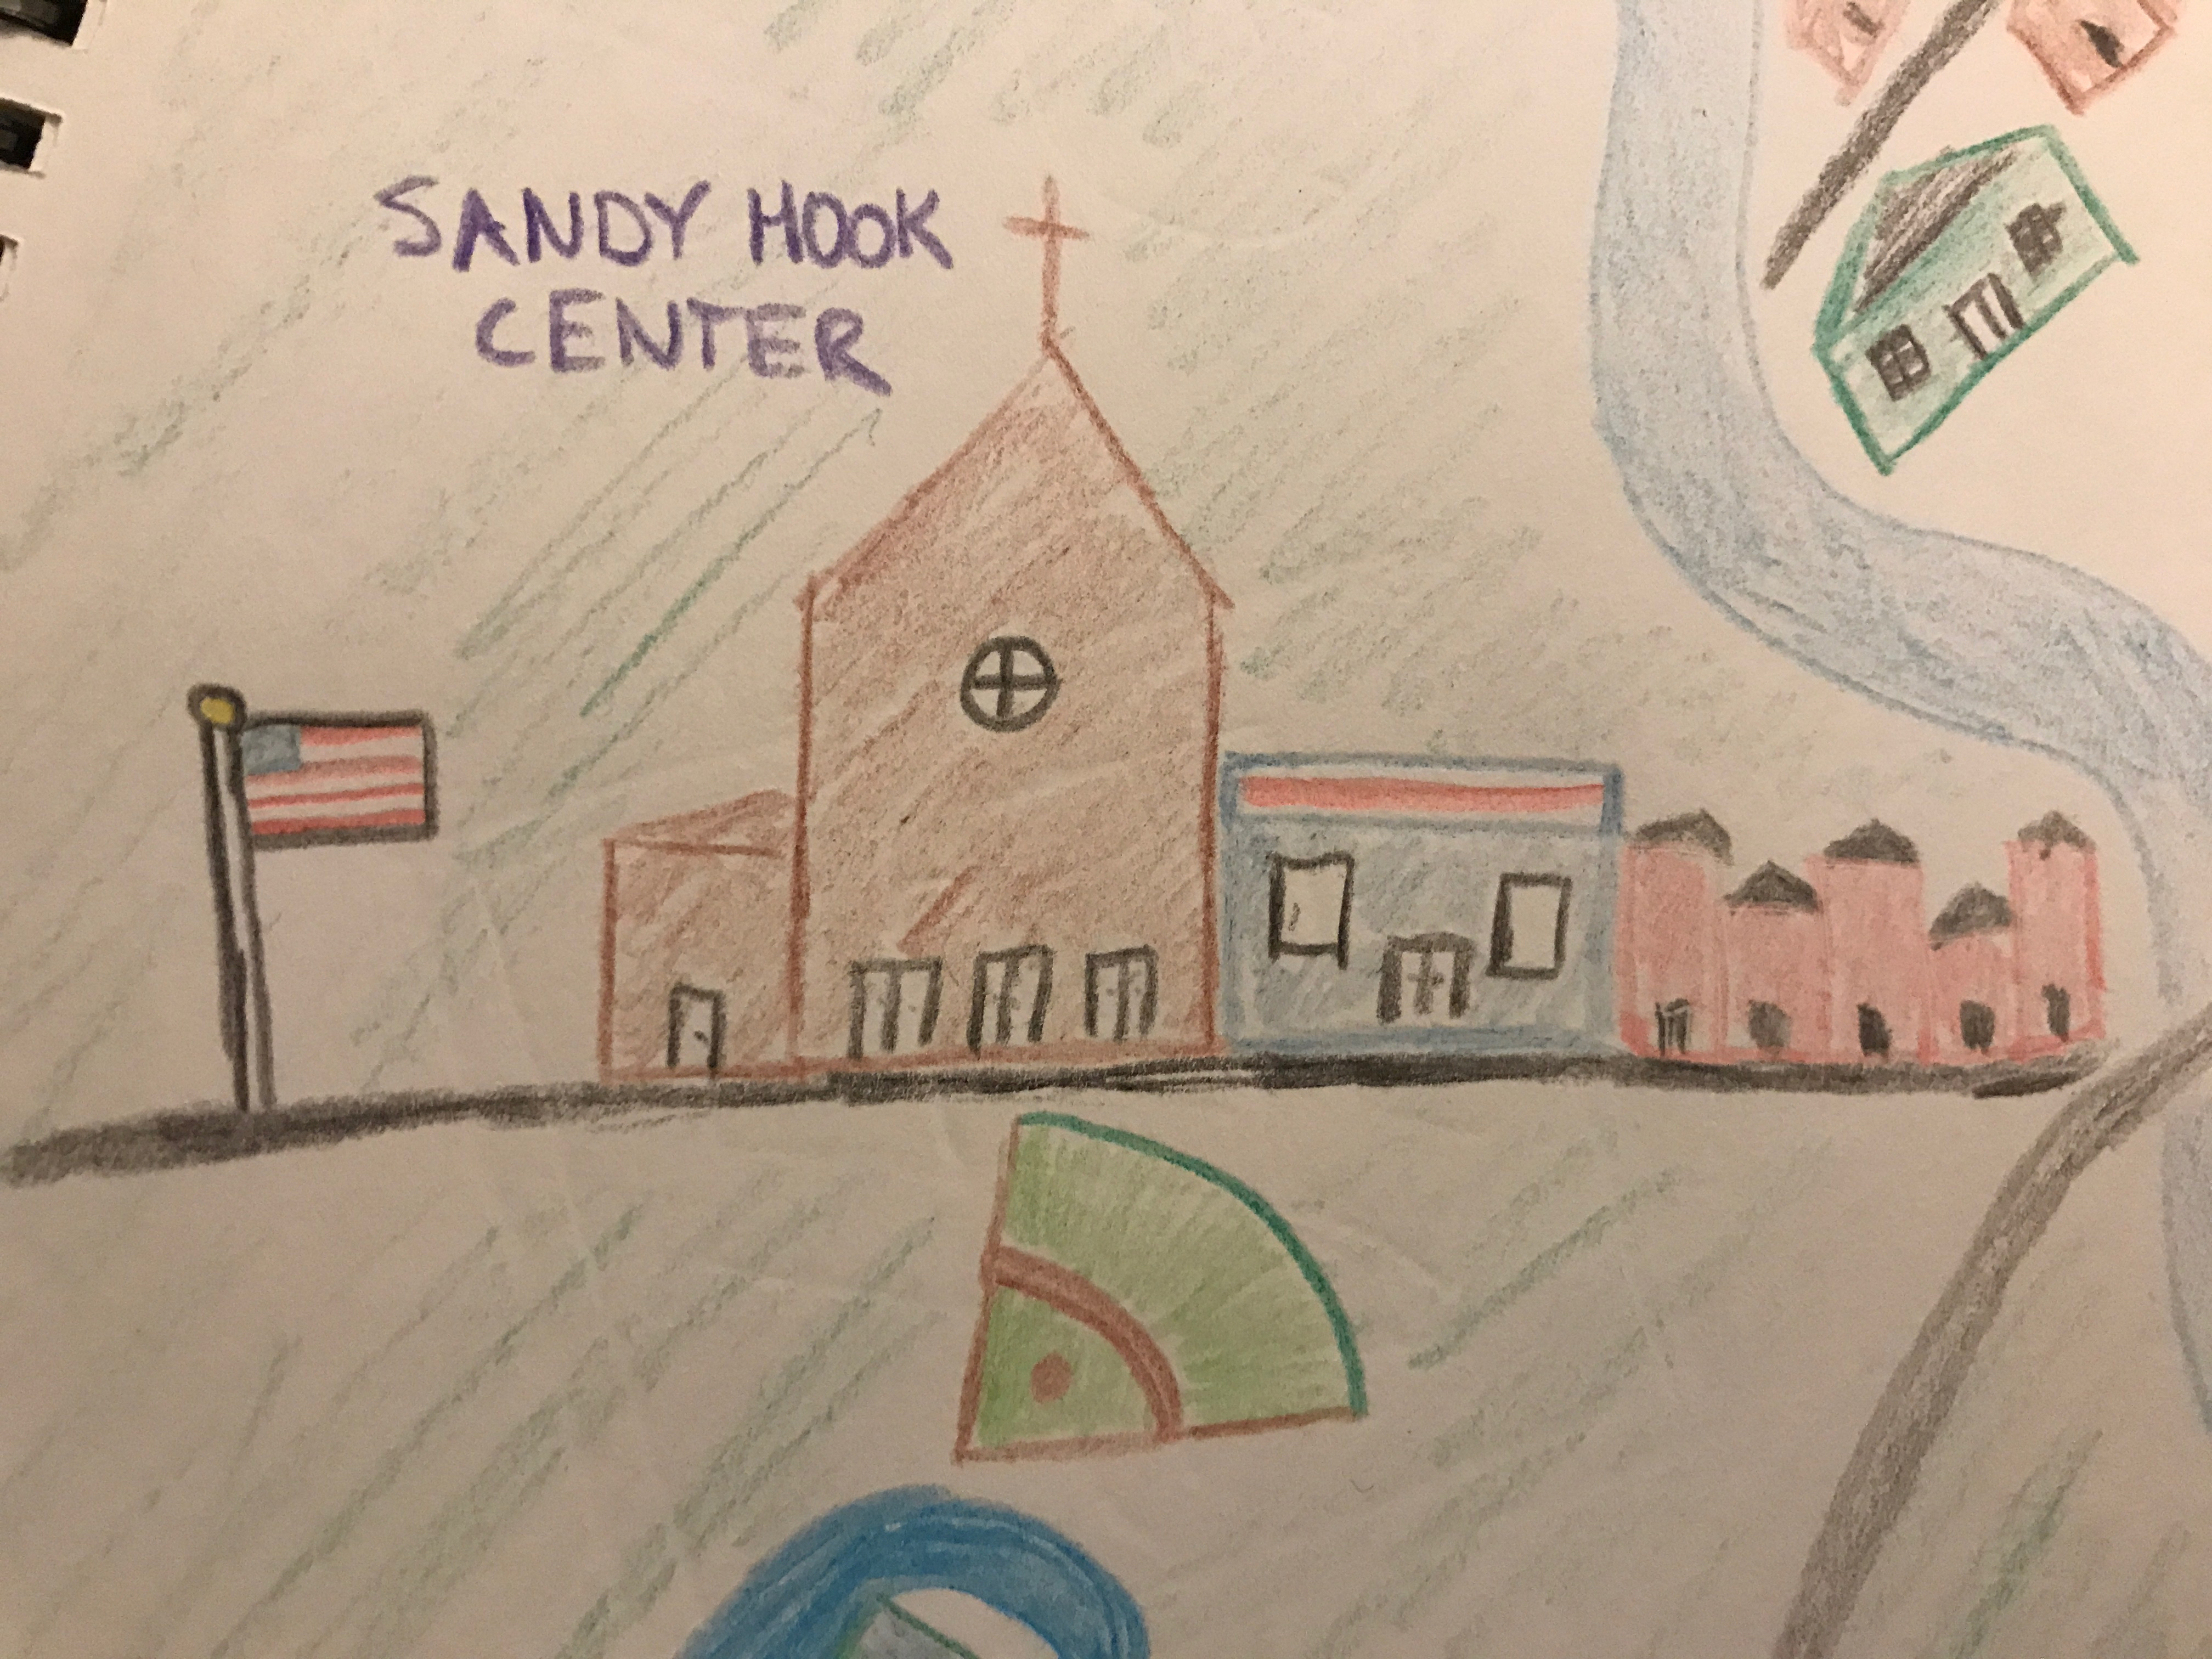 Zoomed In: Sandy Hook Center, Newtown, Connecticut.